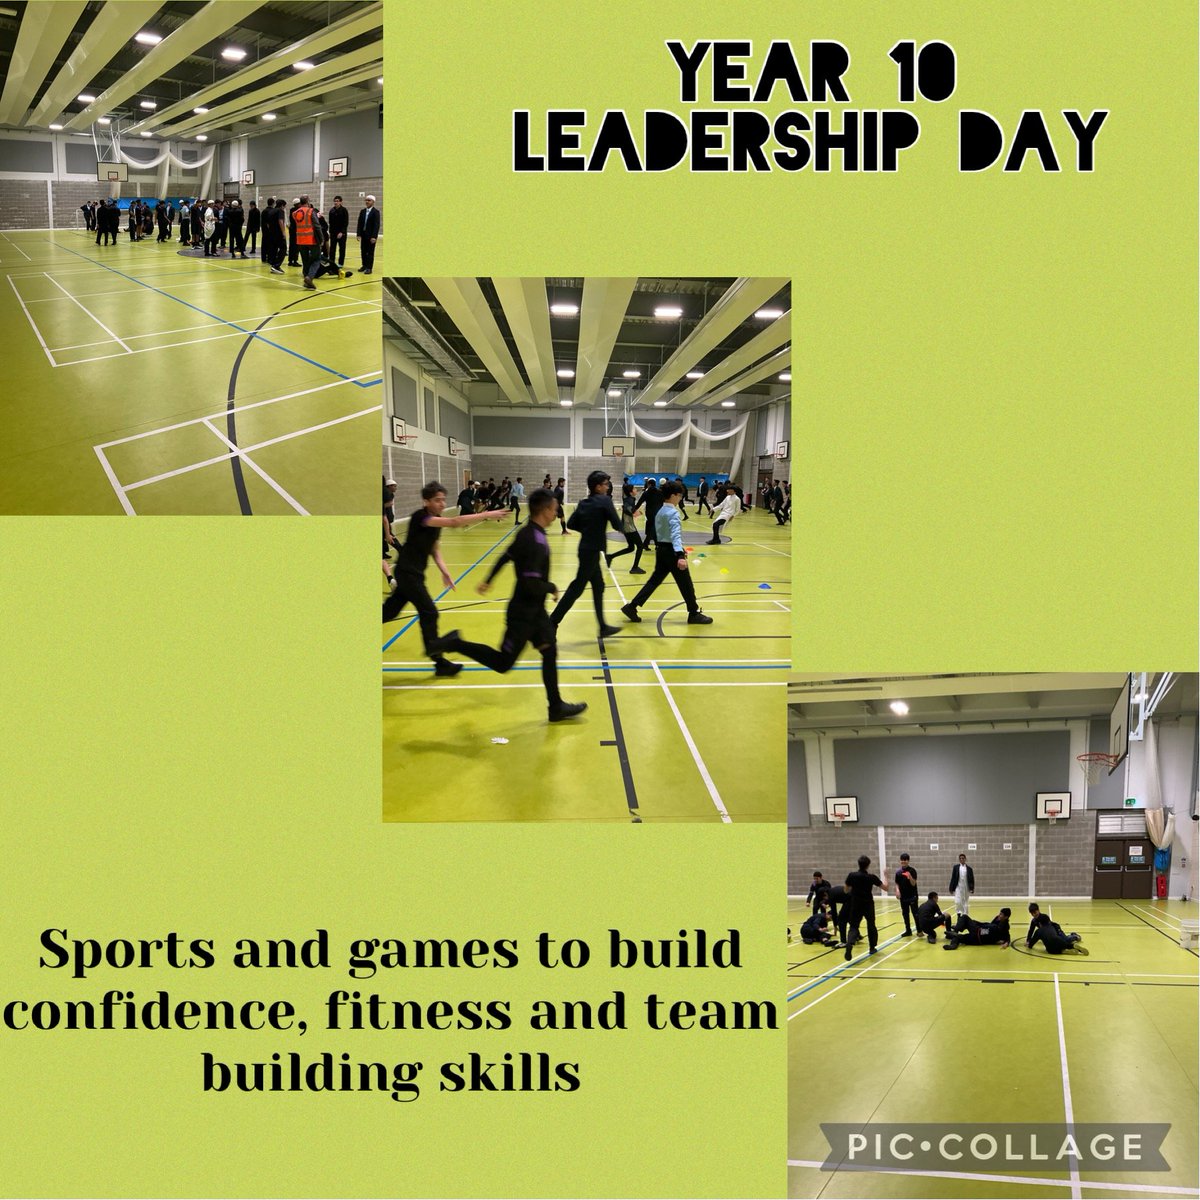 Year 10 have had a lot of fun today in their #LeadershipDay! Thanks to all involved in making today a developmental and memorable one. #Leadership #StarValues #WeAreStar